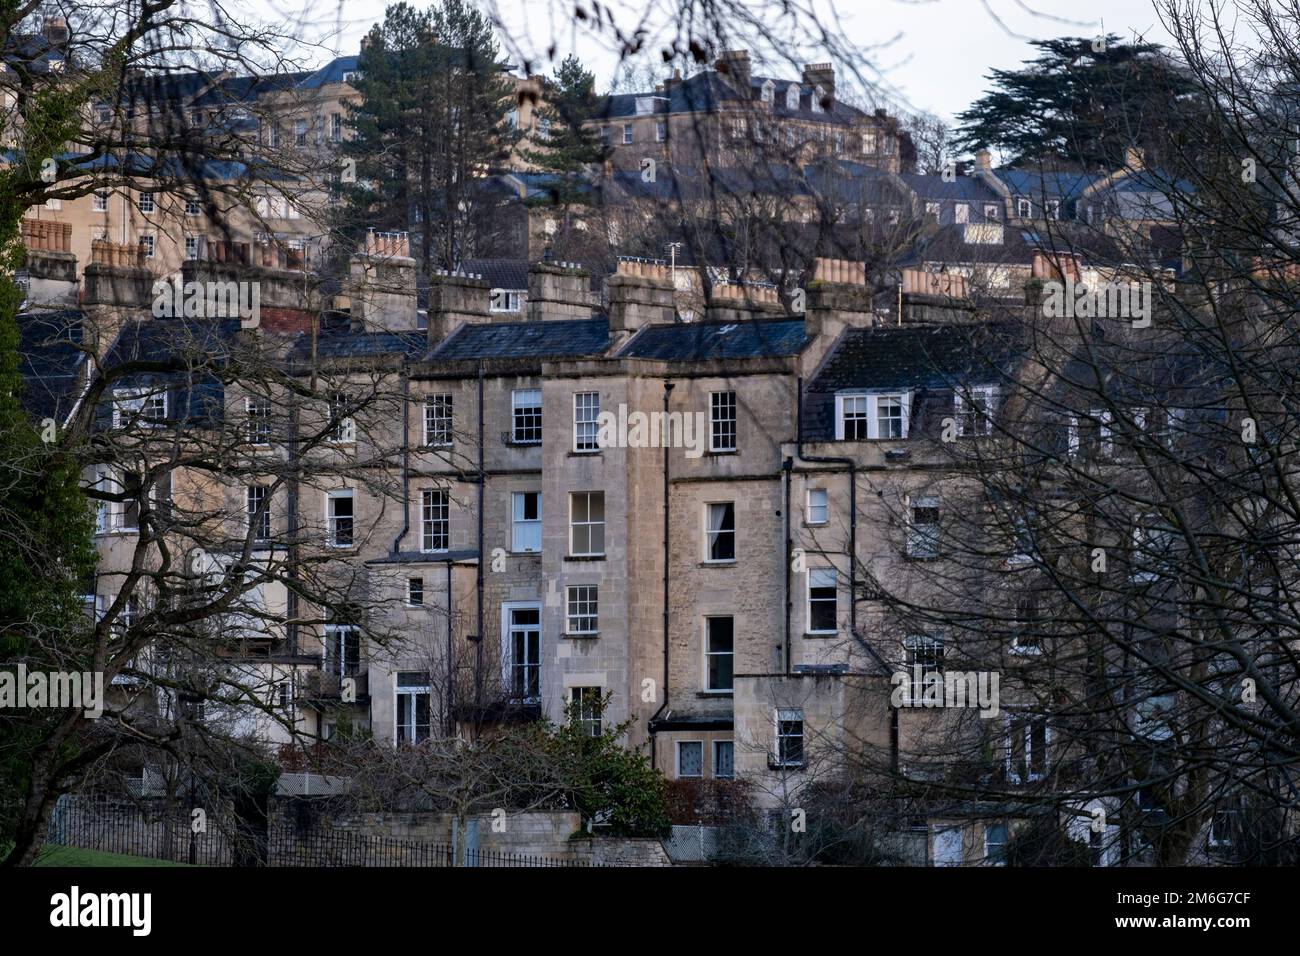 Rooftops and chimneys of Georgian buildings on 29th December 2022 in Bath, United Kingdom. Bath is a city in the county of Somerset, known for and named after its Roman-built baths, and Georgian architecture made from the local honey coloured Bath Stone. The city became a World Heritage Site in 1987, and was later added to the transnational World Heritage Site known as the ‘Great Spa Towns of Europe’ in 2021. Stock Photo